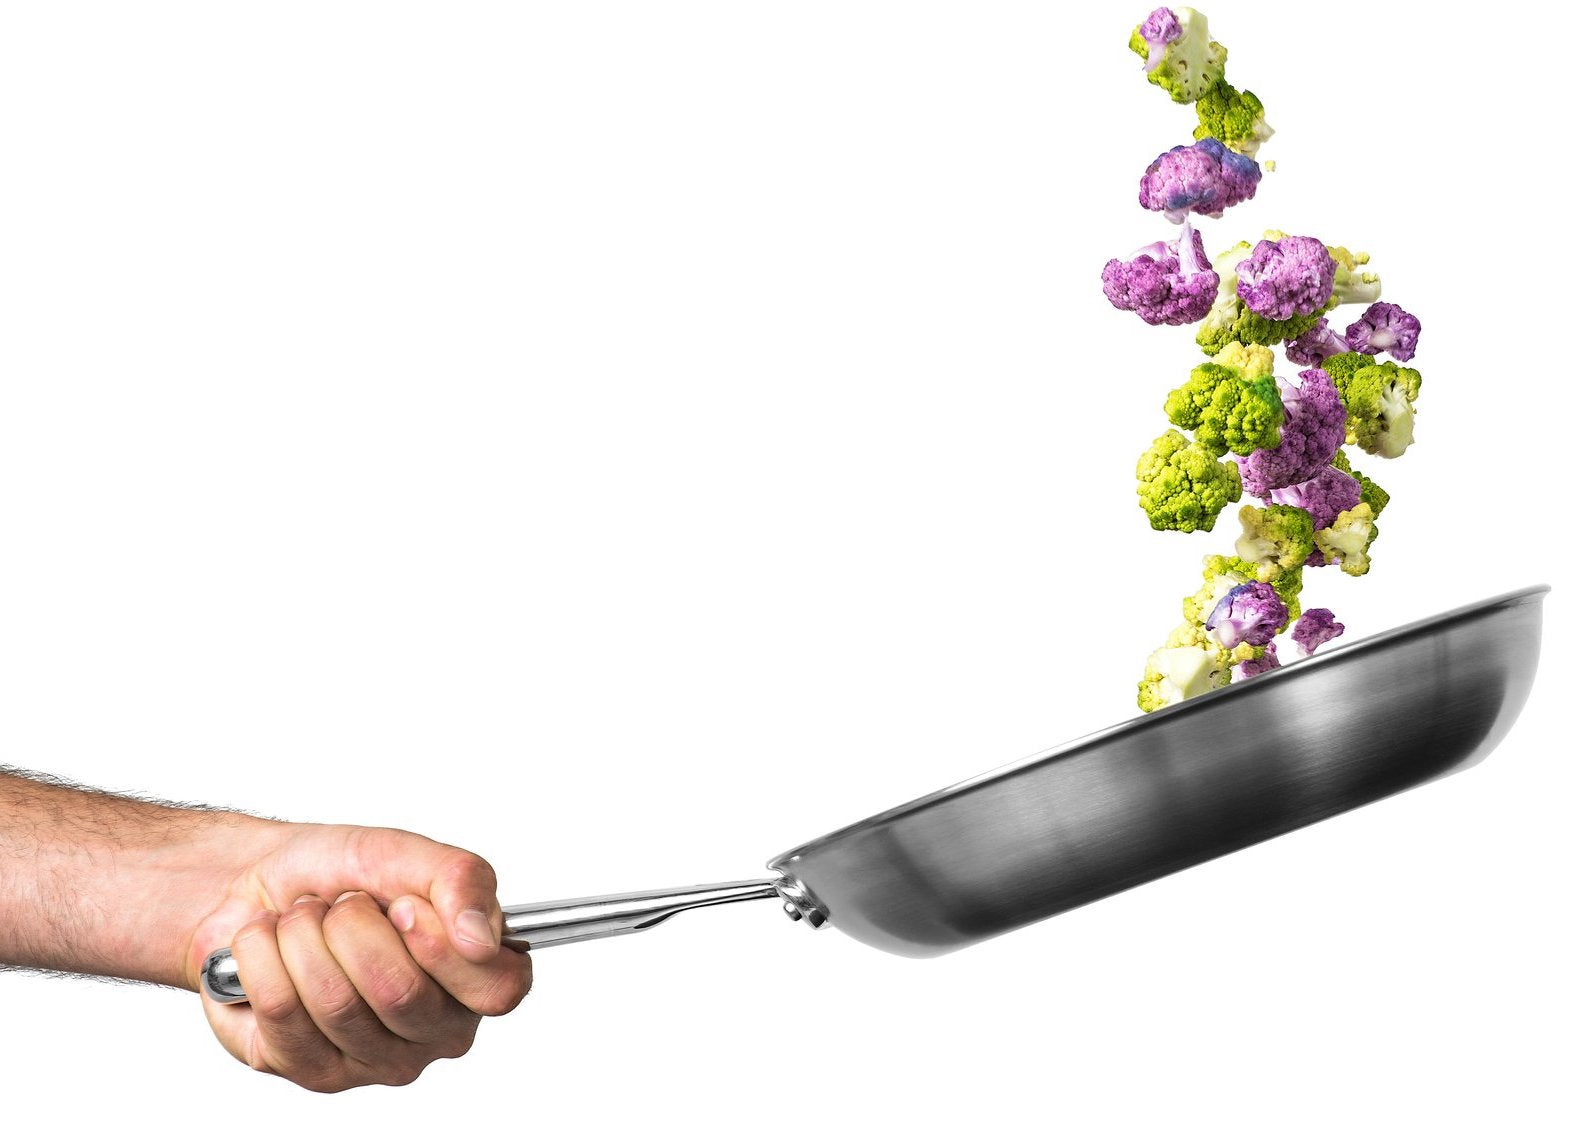 Best stainless steel cookware: A hand flips cauliflower in a stainless steel skillet